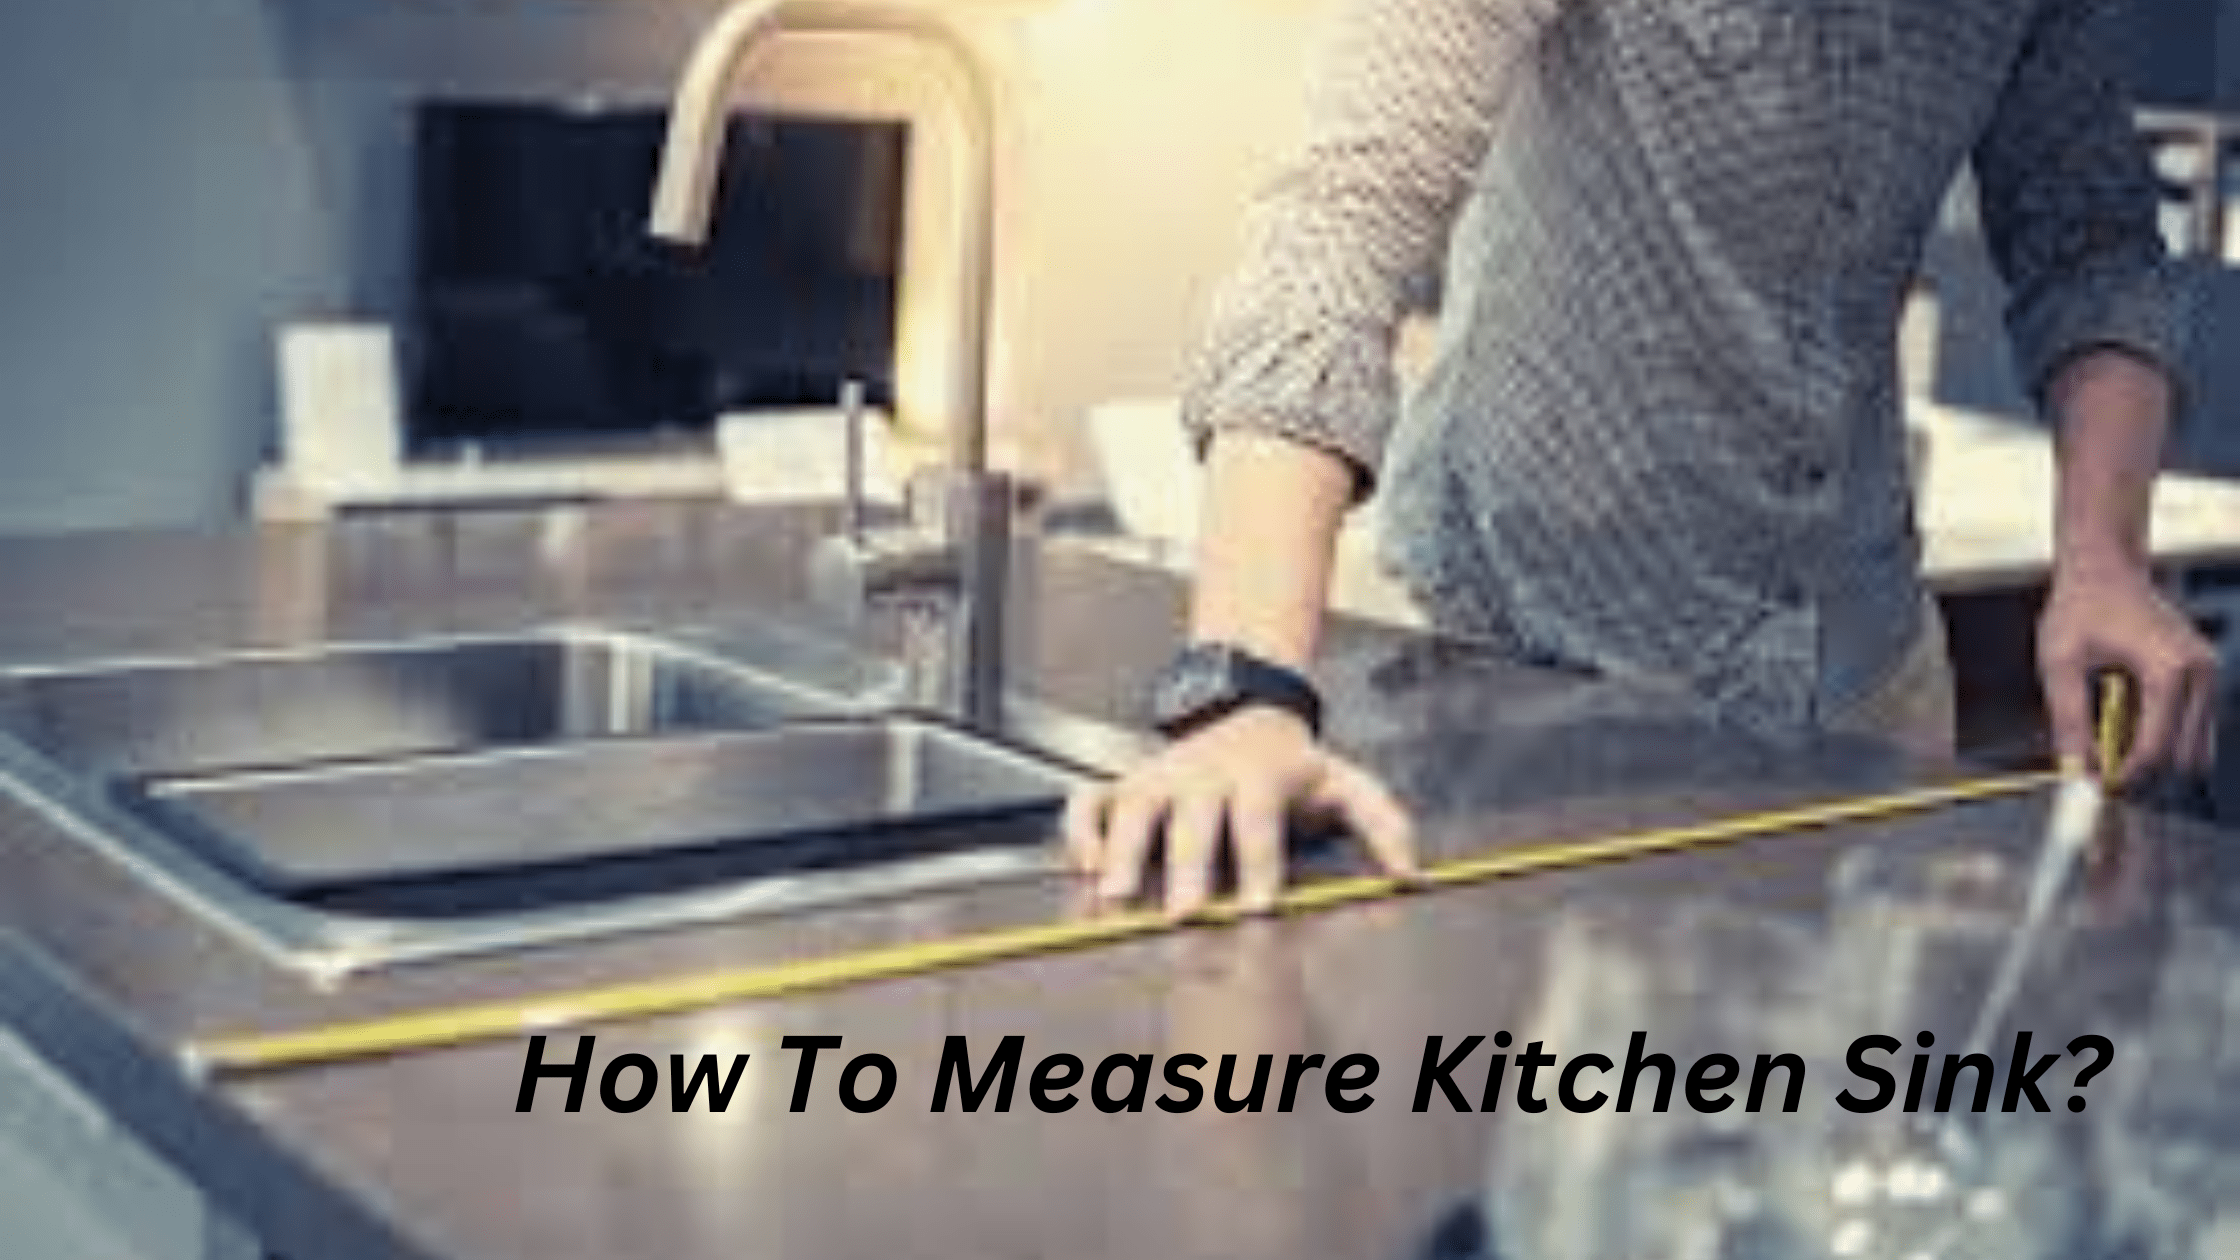 How To Measure Kitchen Sink?